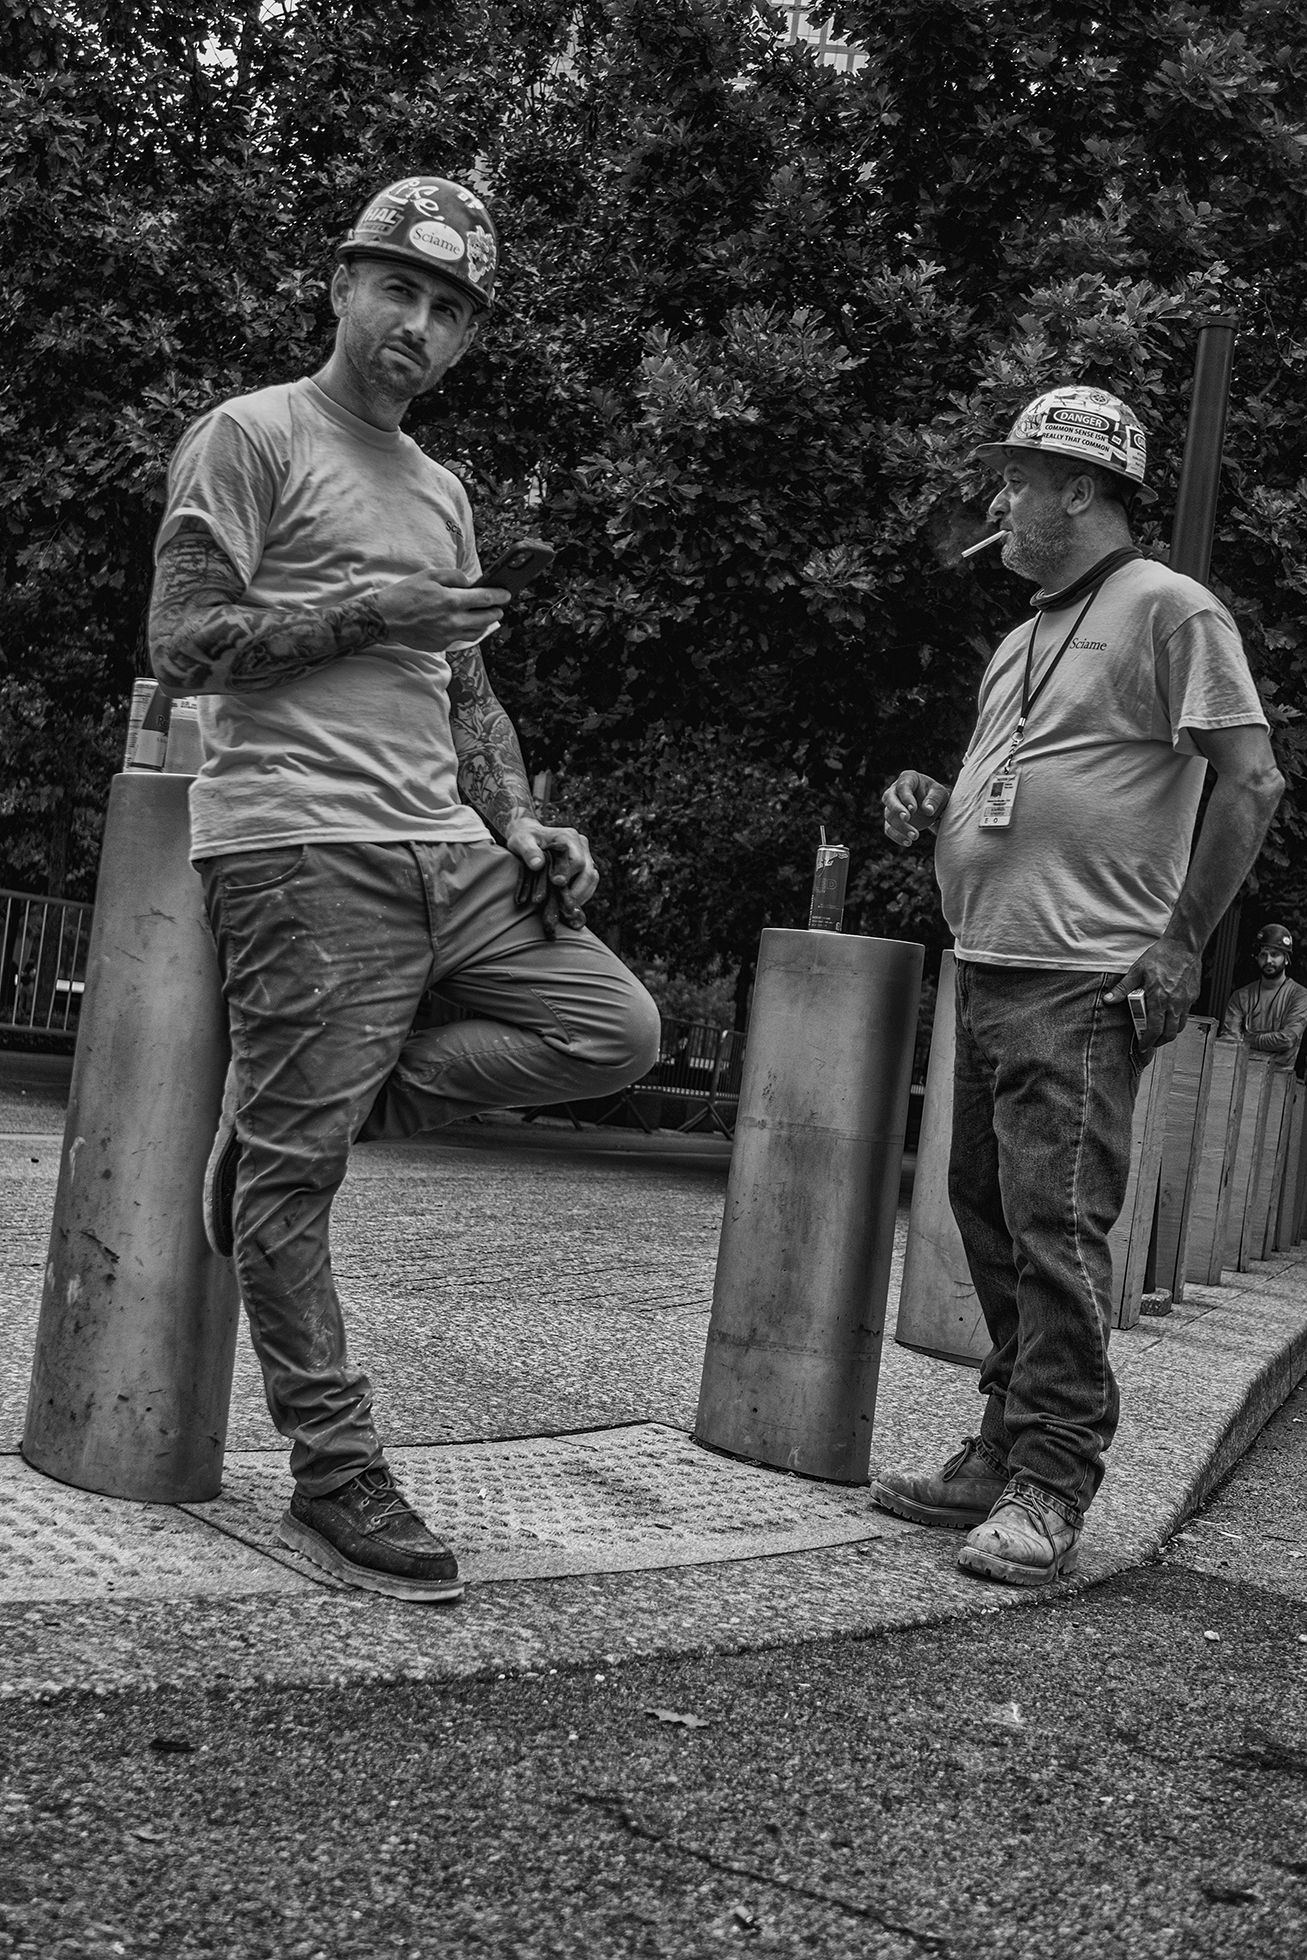 Two men in work clothes and hardhats take a break by metal bollards that they have placed canned beverages on top of. One man with sleeve tattoos leans against a bollard while holding a smartphone. The other man has a cigarette in his mouth.